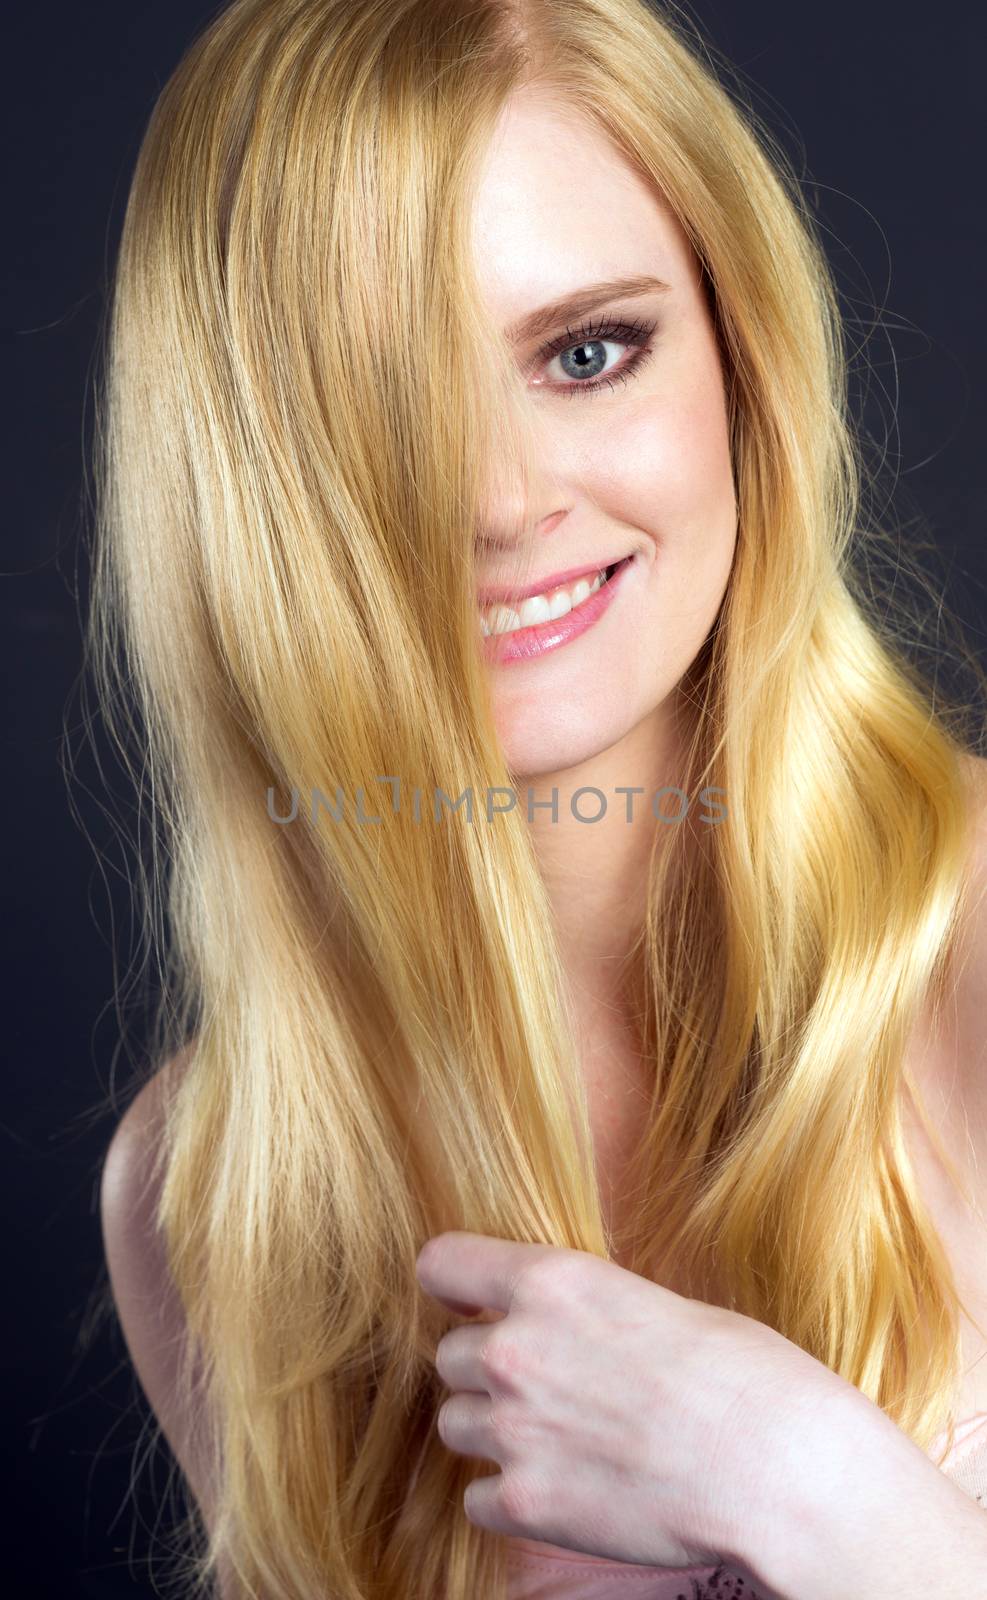 Beautiful Smiling Blond Woman Grooming Brushing Her Hair by ChrisBoswell